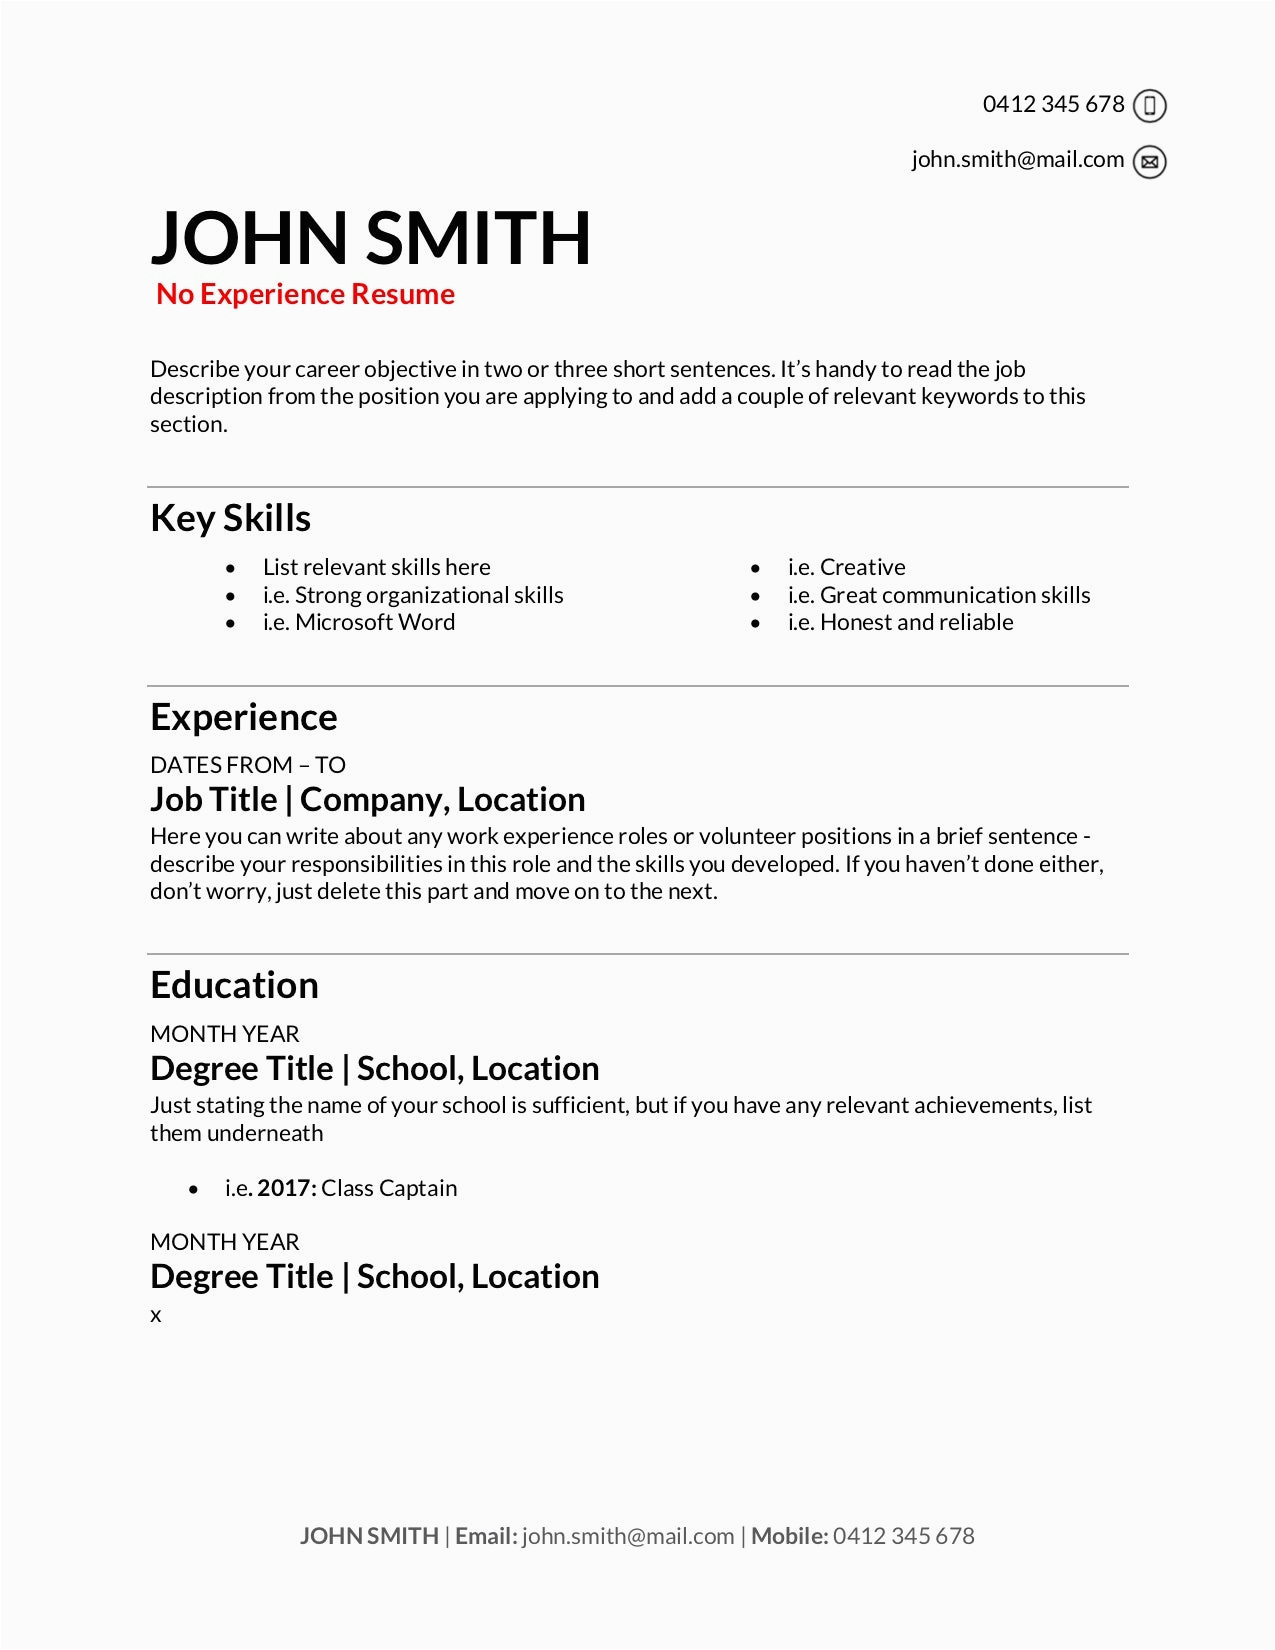 Beginners Resume with No Experience Template Nursing Student Resume with No Experience Pdf Collection